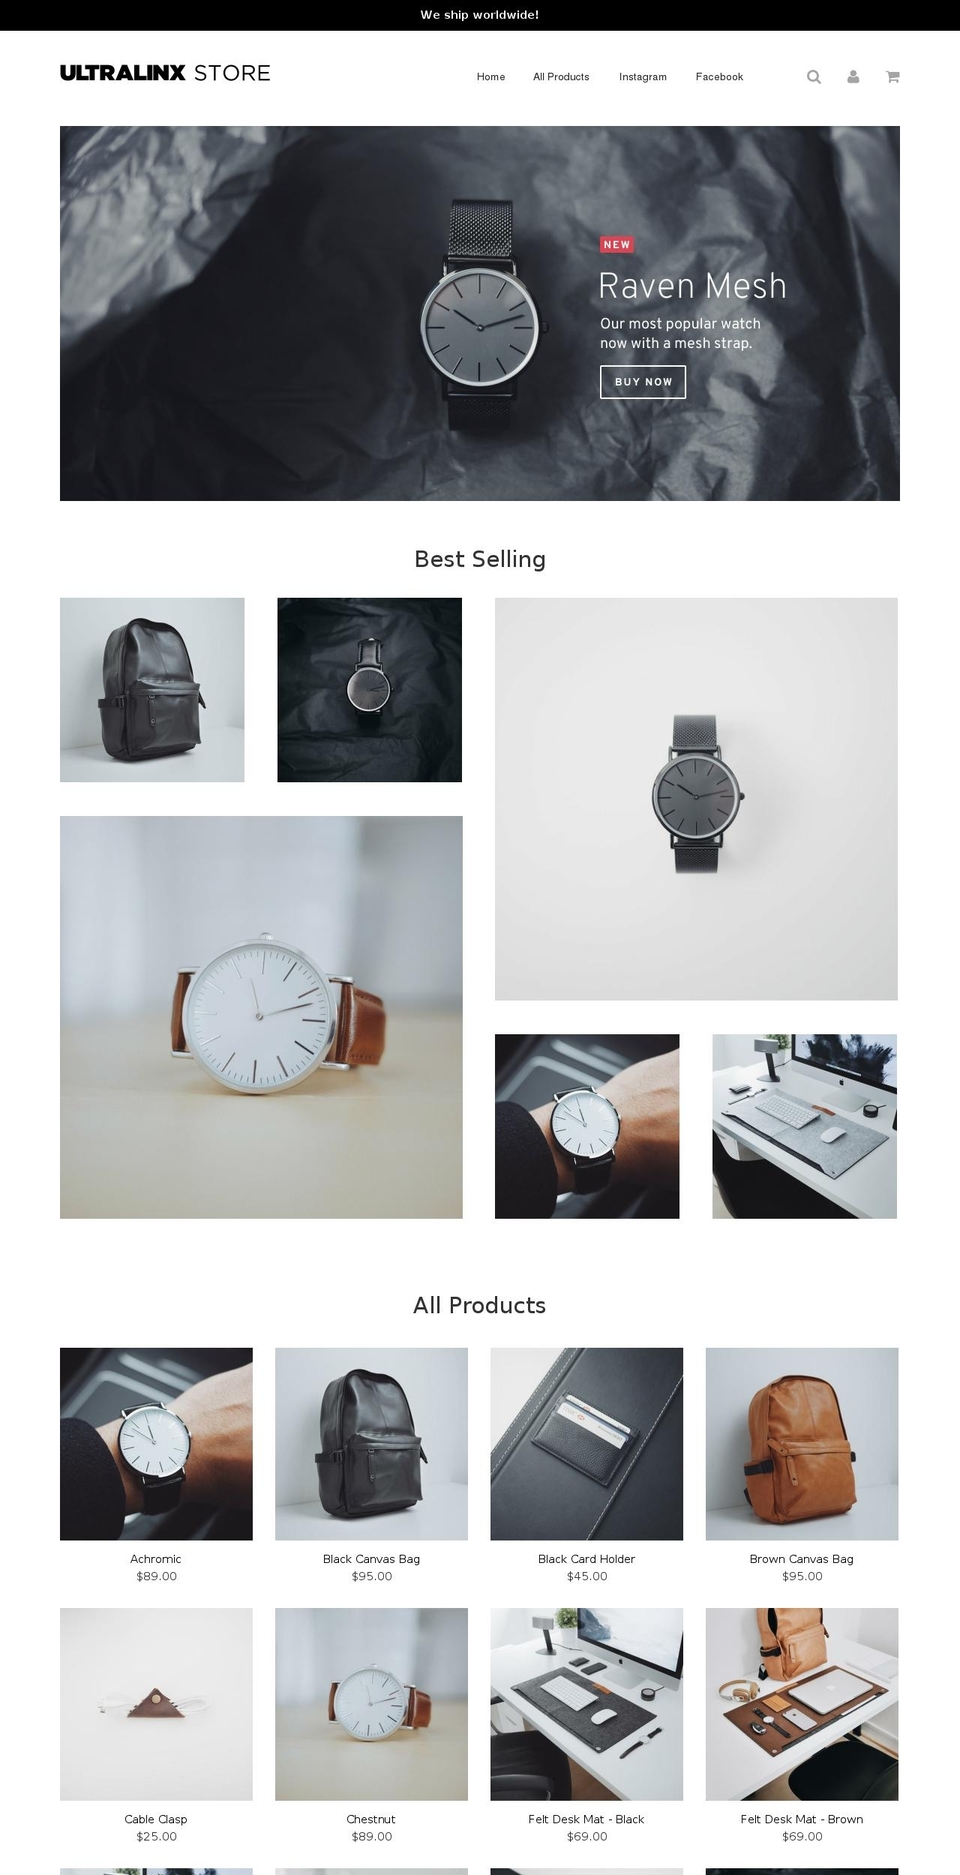 Dawn Shopify theme site example ultralinxstore.com